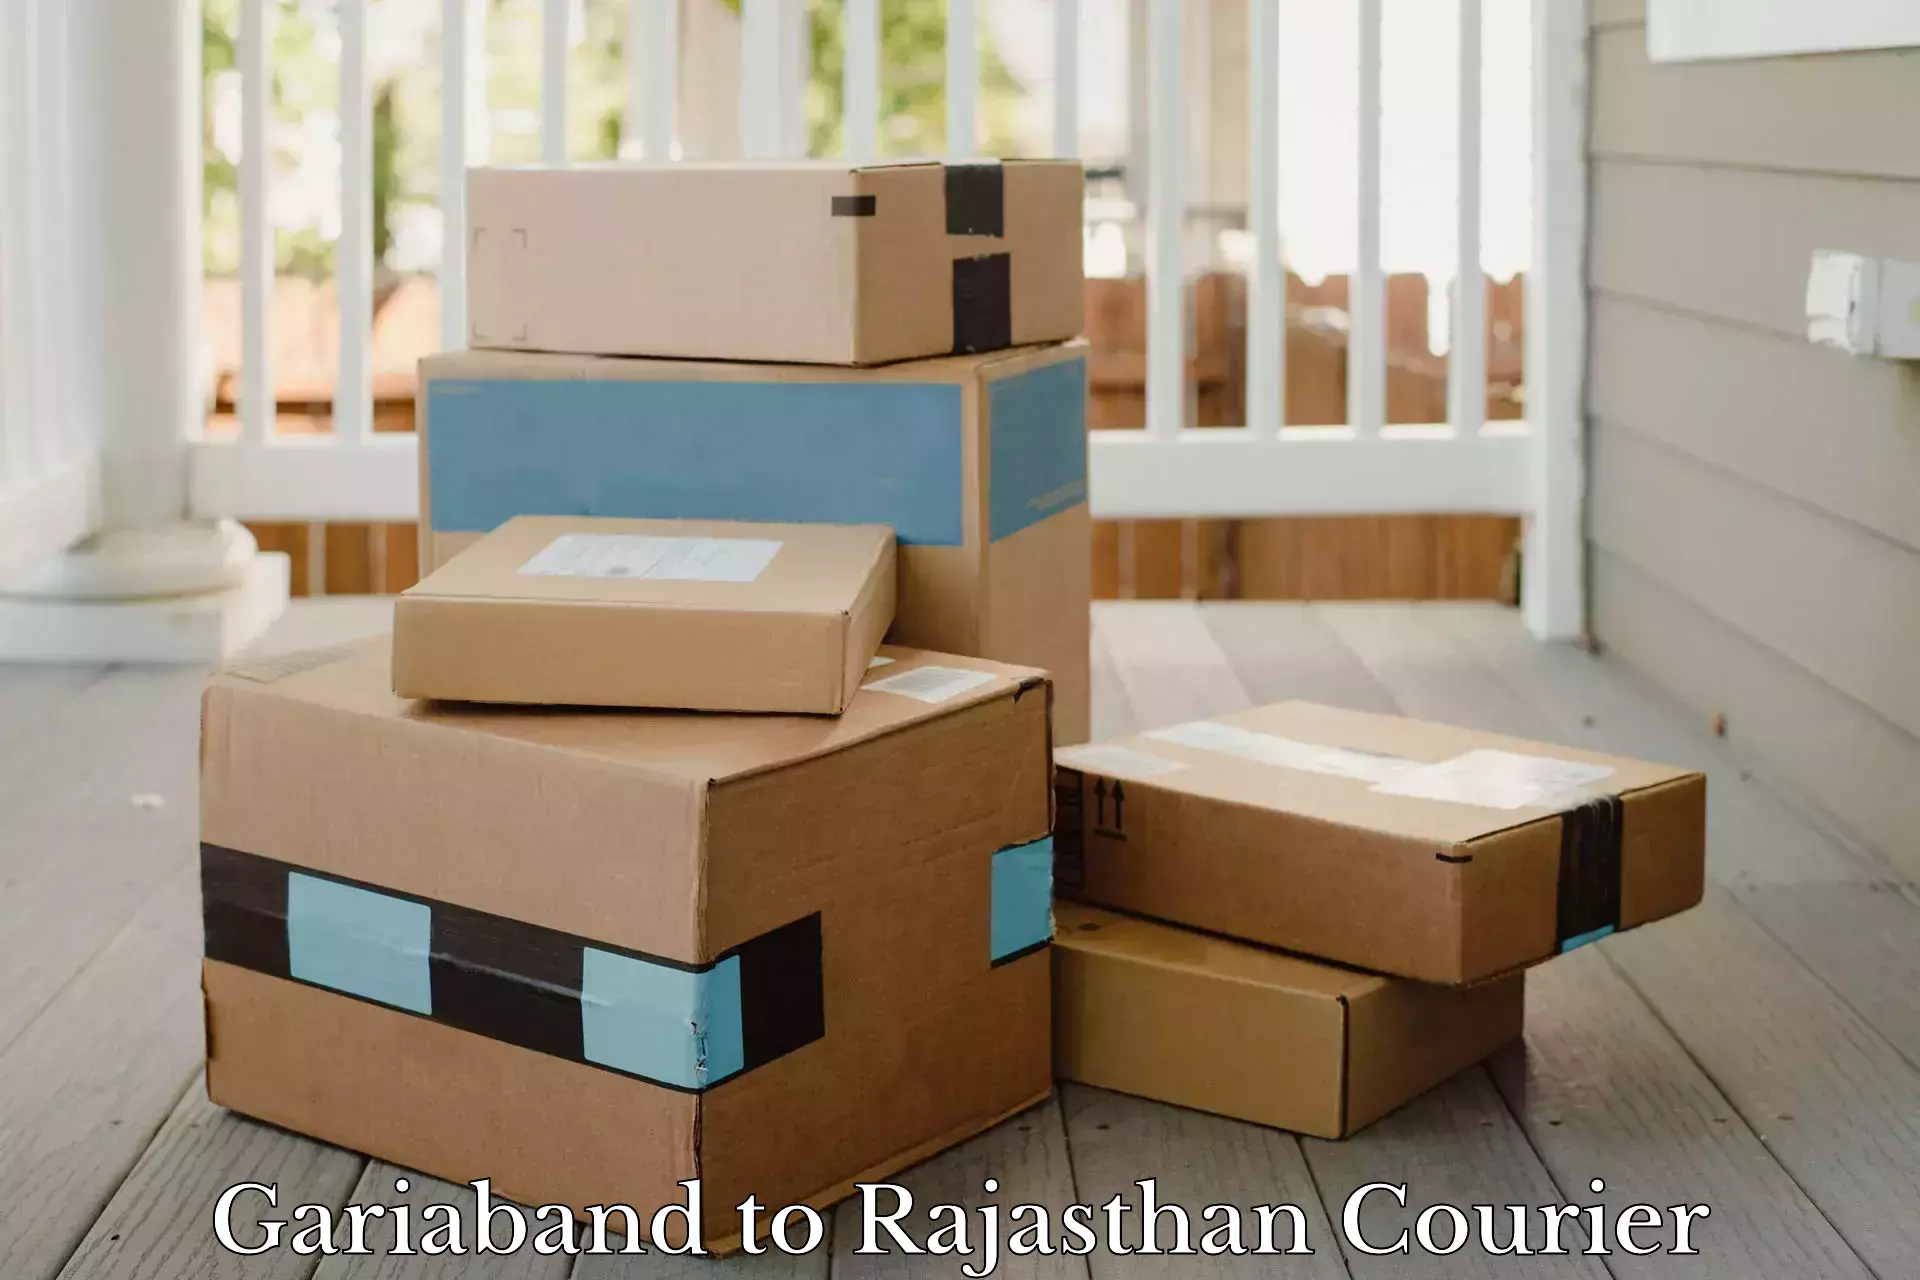 Parcel handling and care Gariaband to Rajasthan